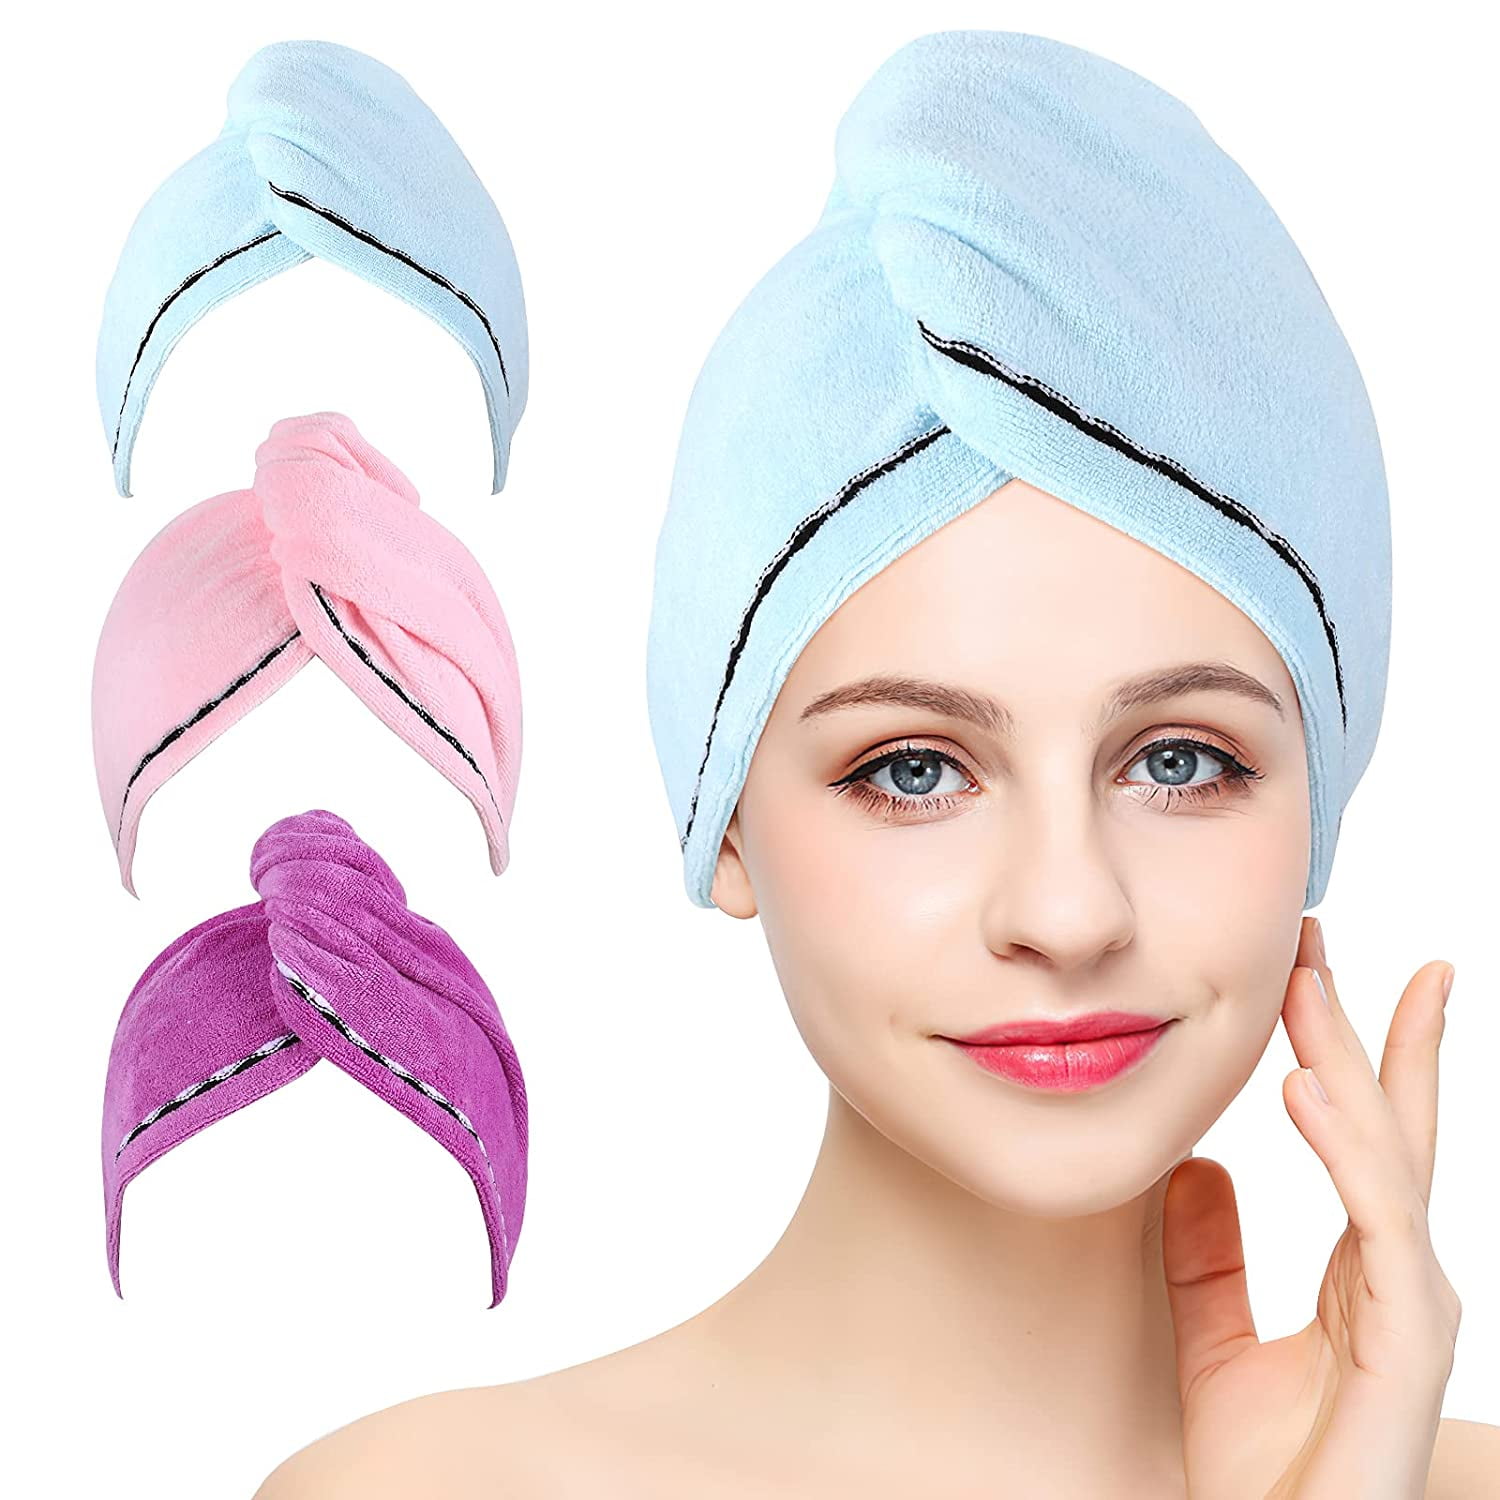 Details about   3+1 Pack Hair Towel Wrap Fast Drying Hair Turban Anti-Frizz Microfiber Wet Hair 